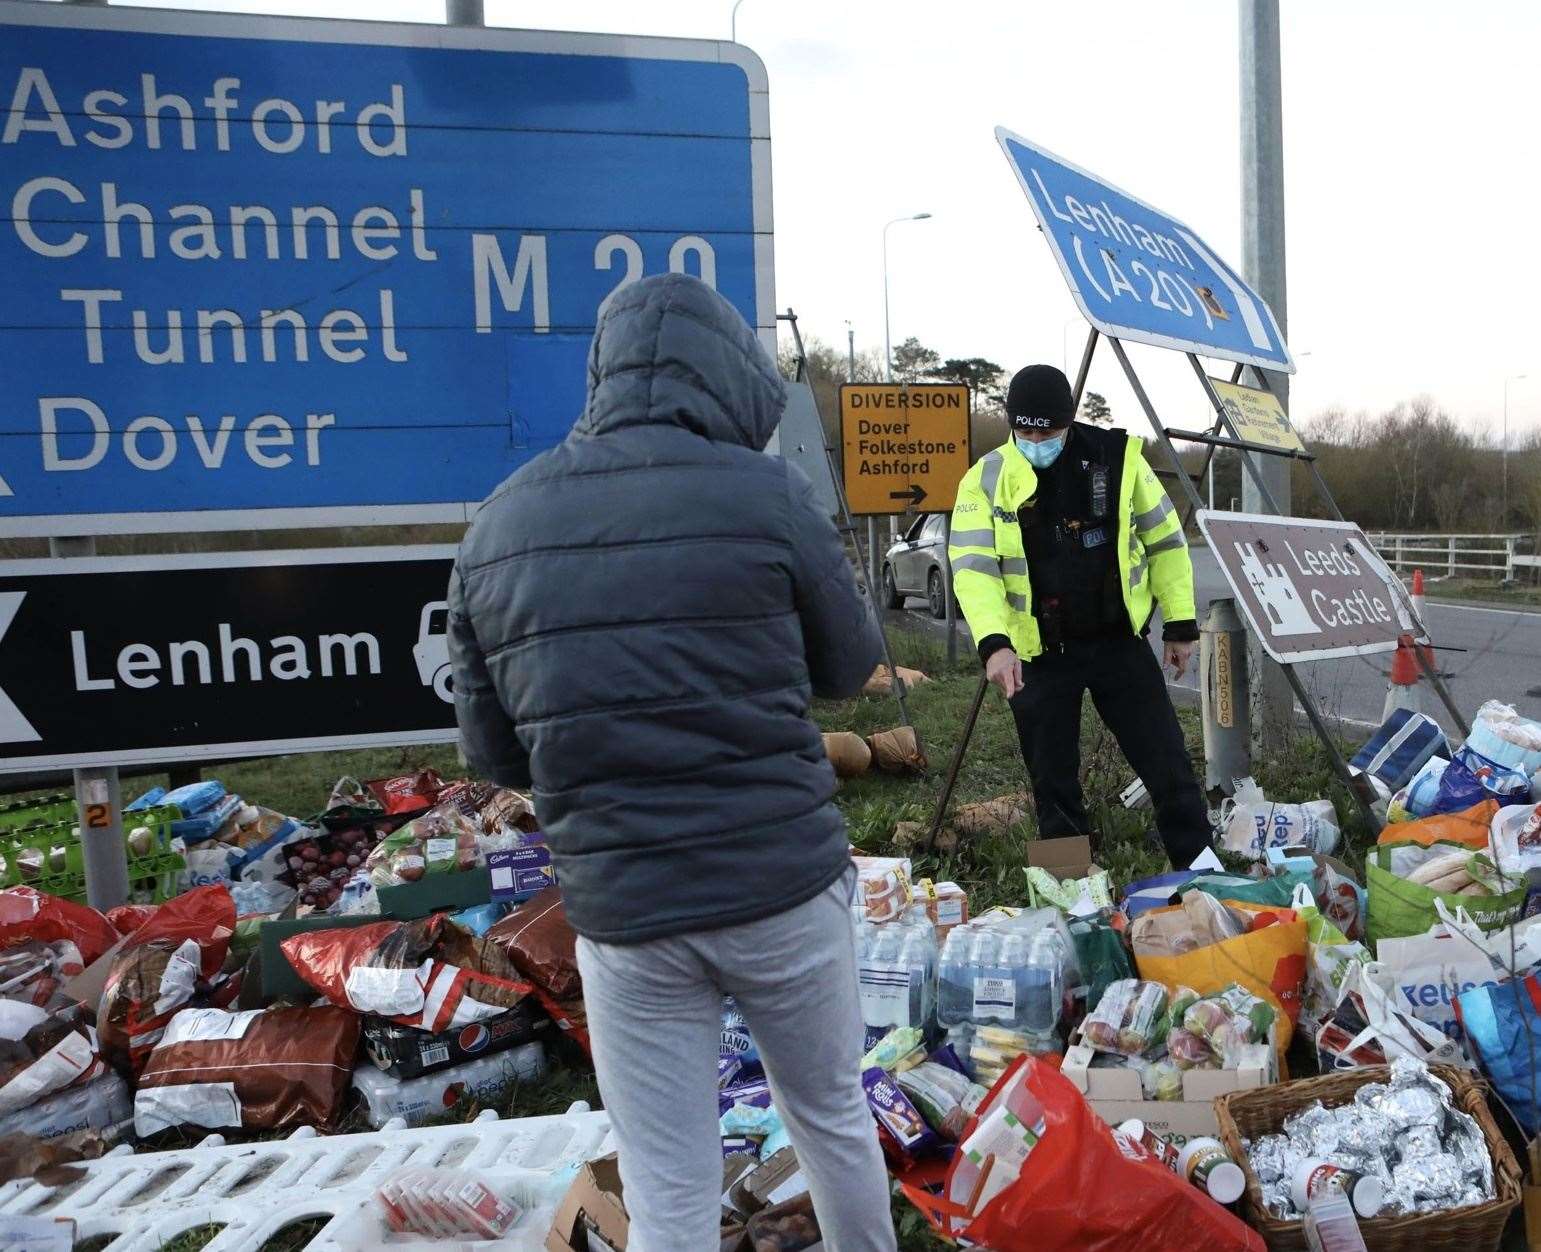 Supplies were left for drivers stranded on the M20 over Christmas. Picture: UKNIP